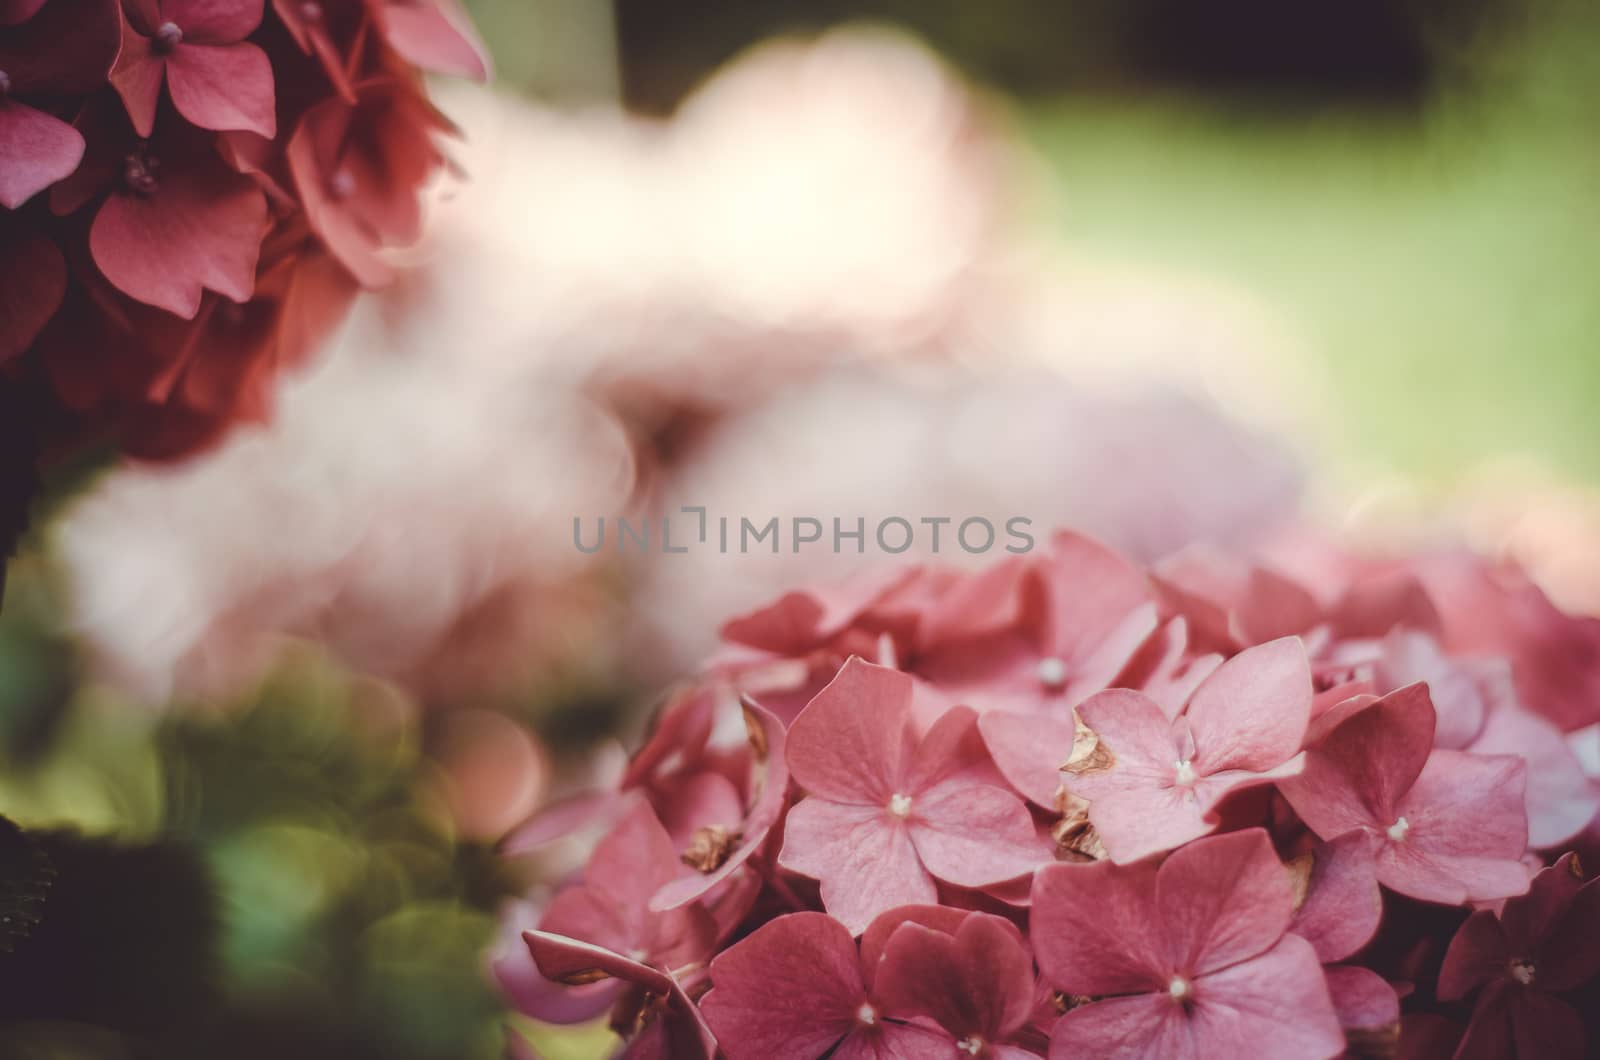 Two bunches of pink flowers over green blurred background